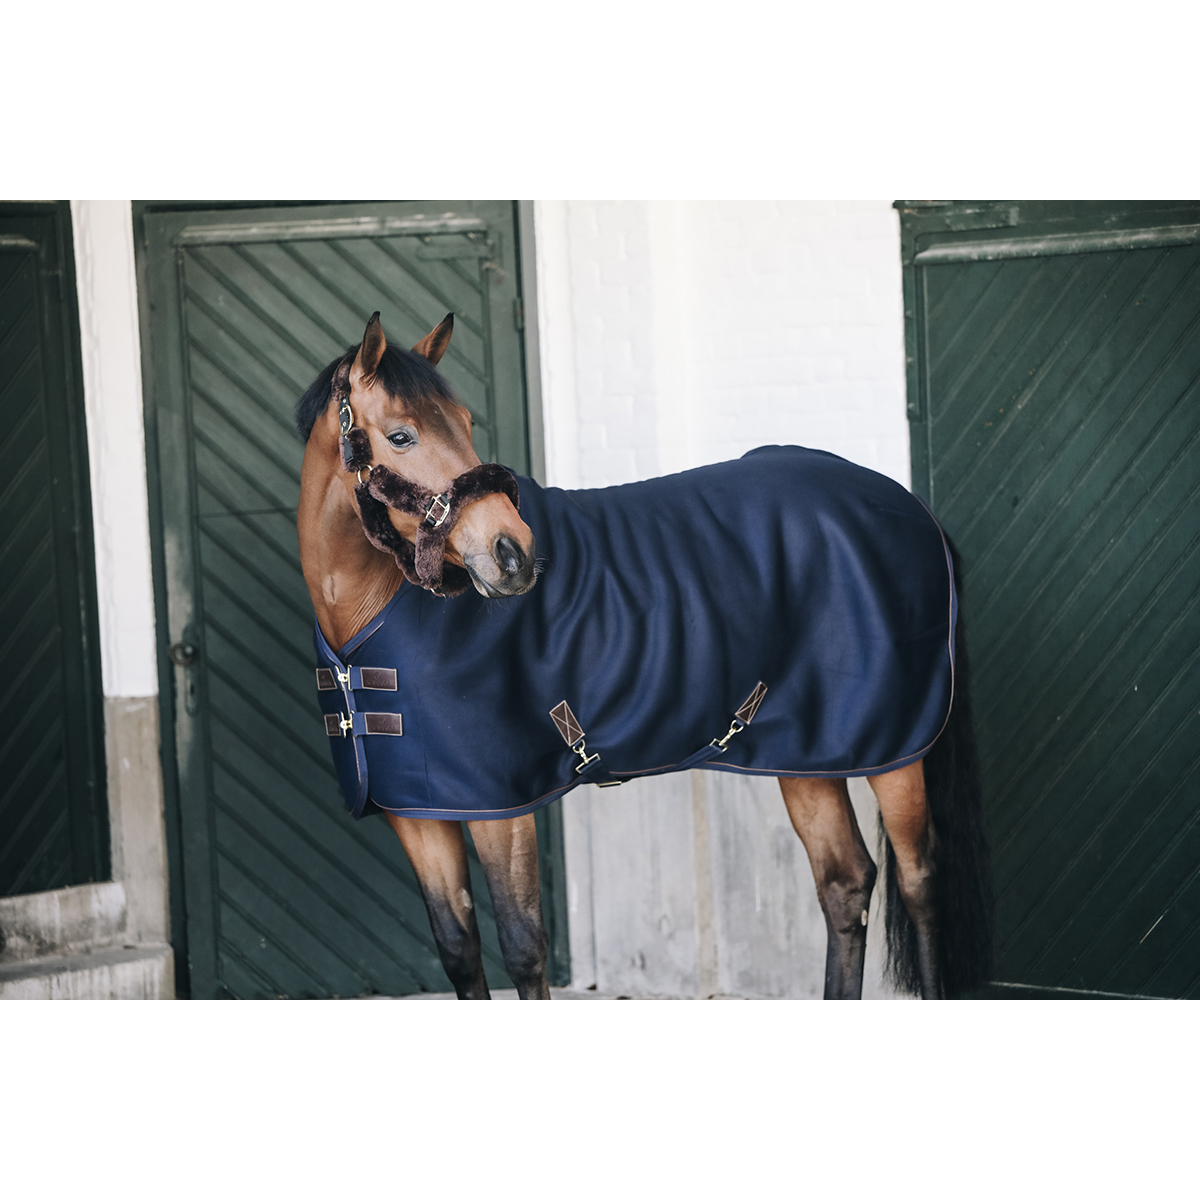 NAVY BLUE SQUARE 4'3"  EXERCISE SHEET LINED NEW END OF LINE HORSE PONY 